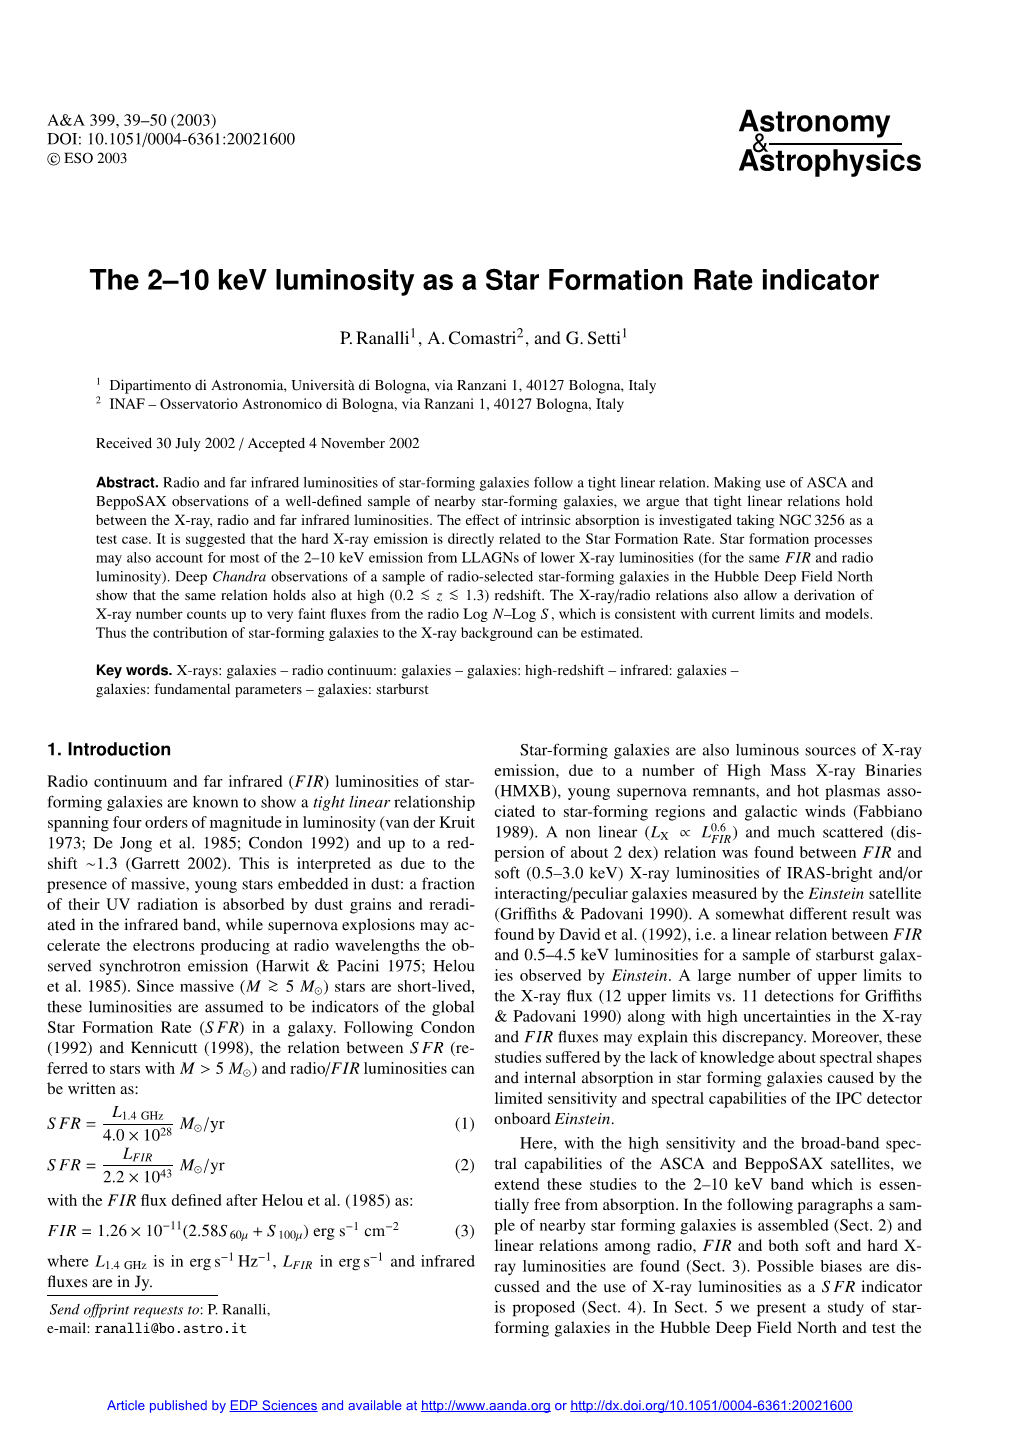 The 2–10 Kev Luminosity As a Star Formation Rate Indicator